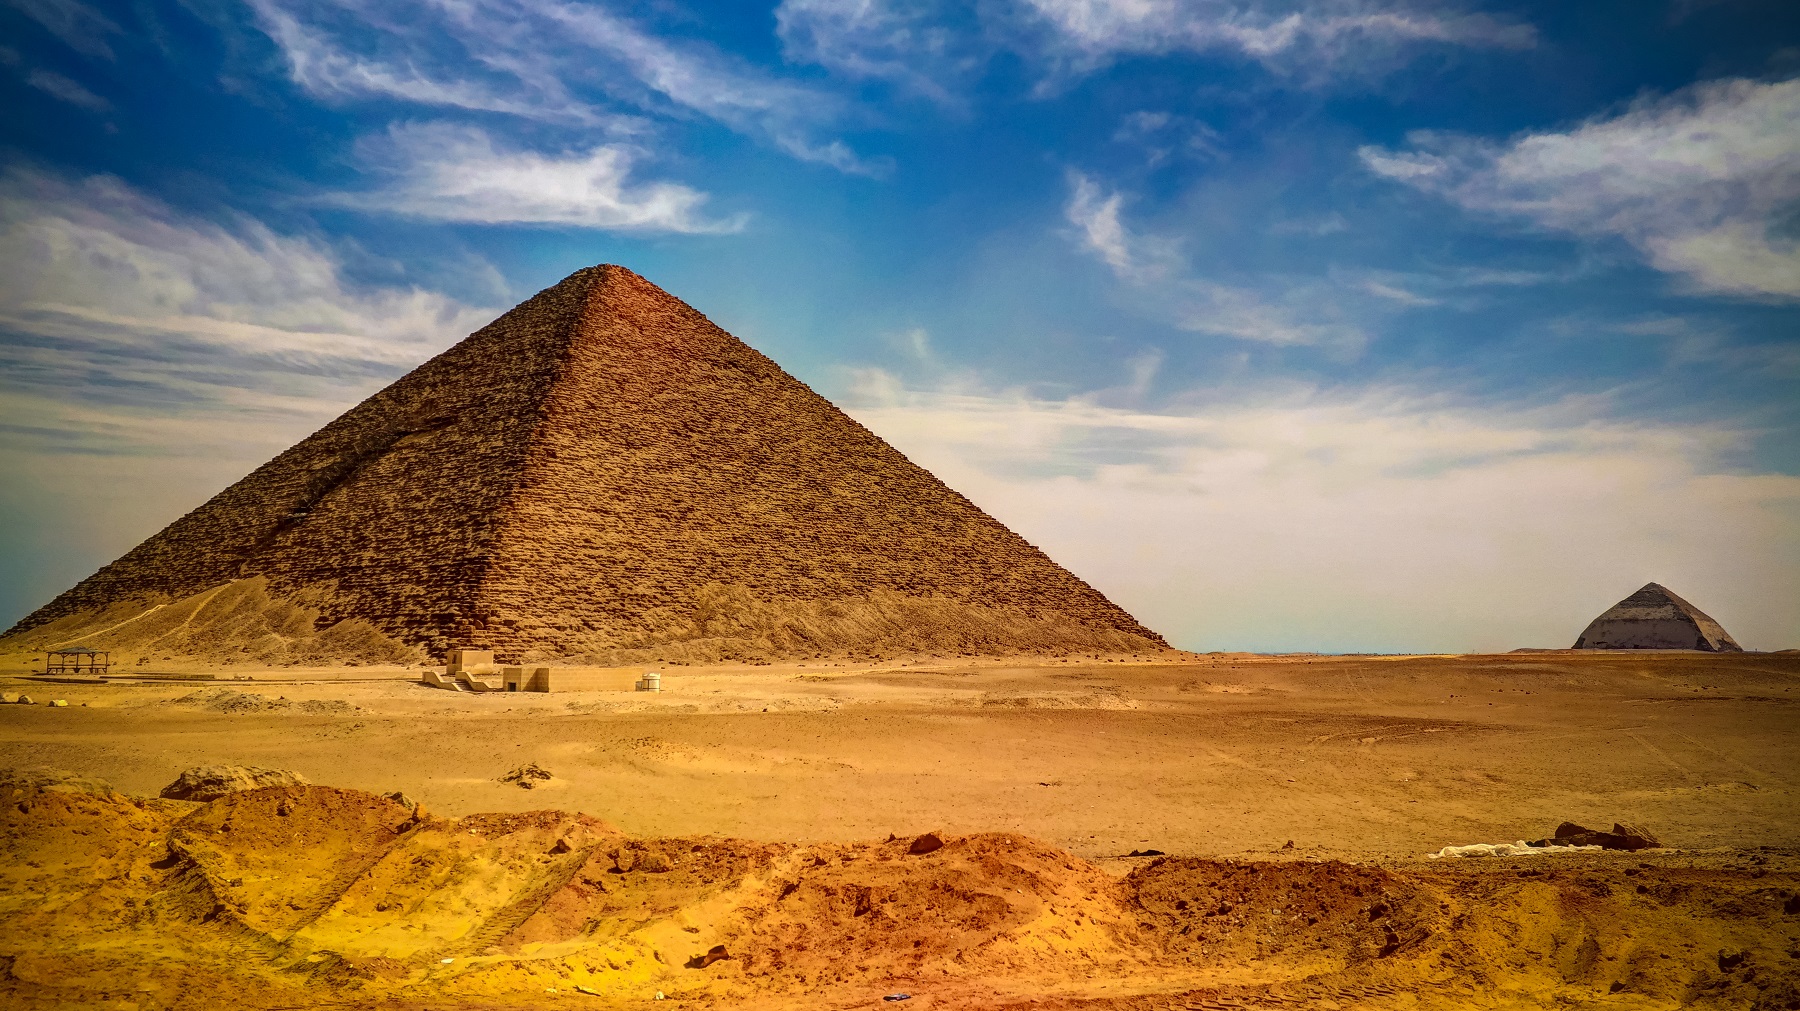 Sneferu's Red Pyramid: Ancient Egypt's Third-Largest Pyramid